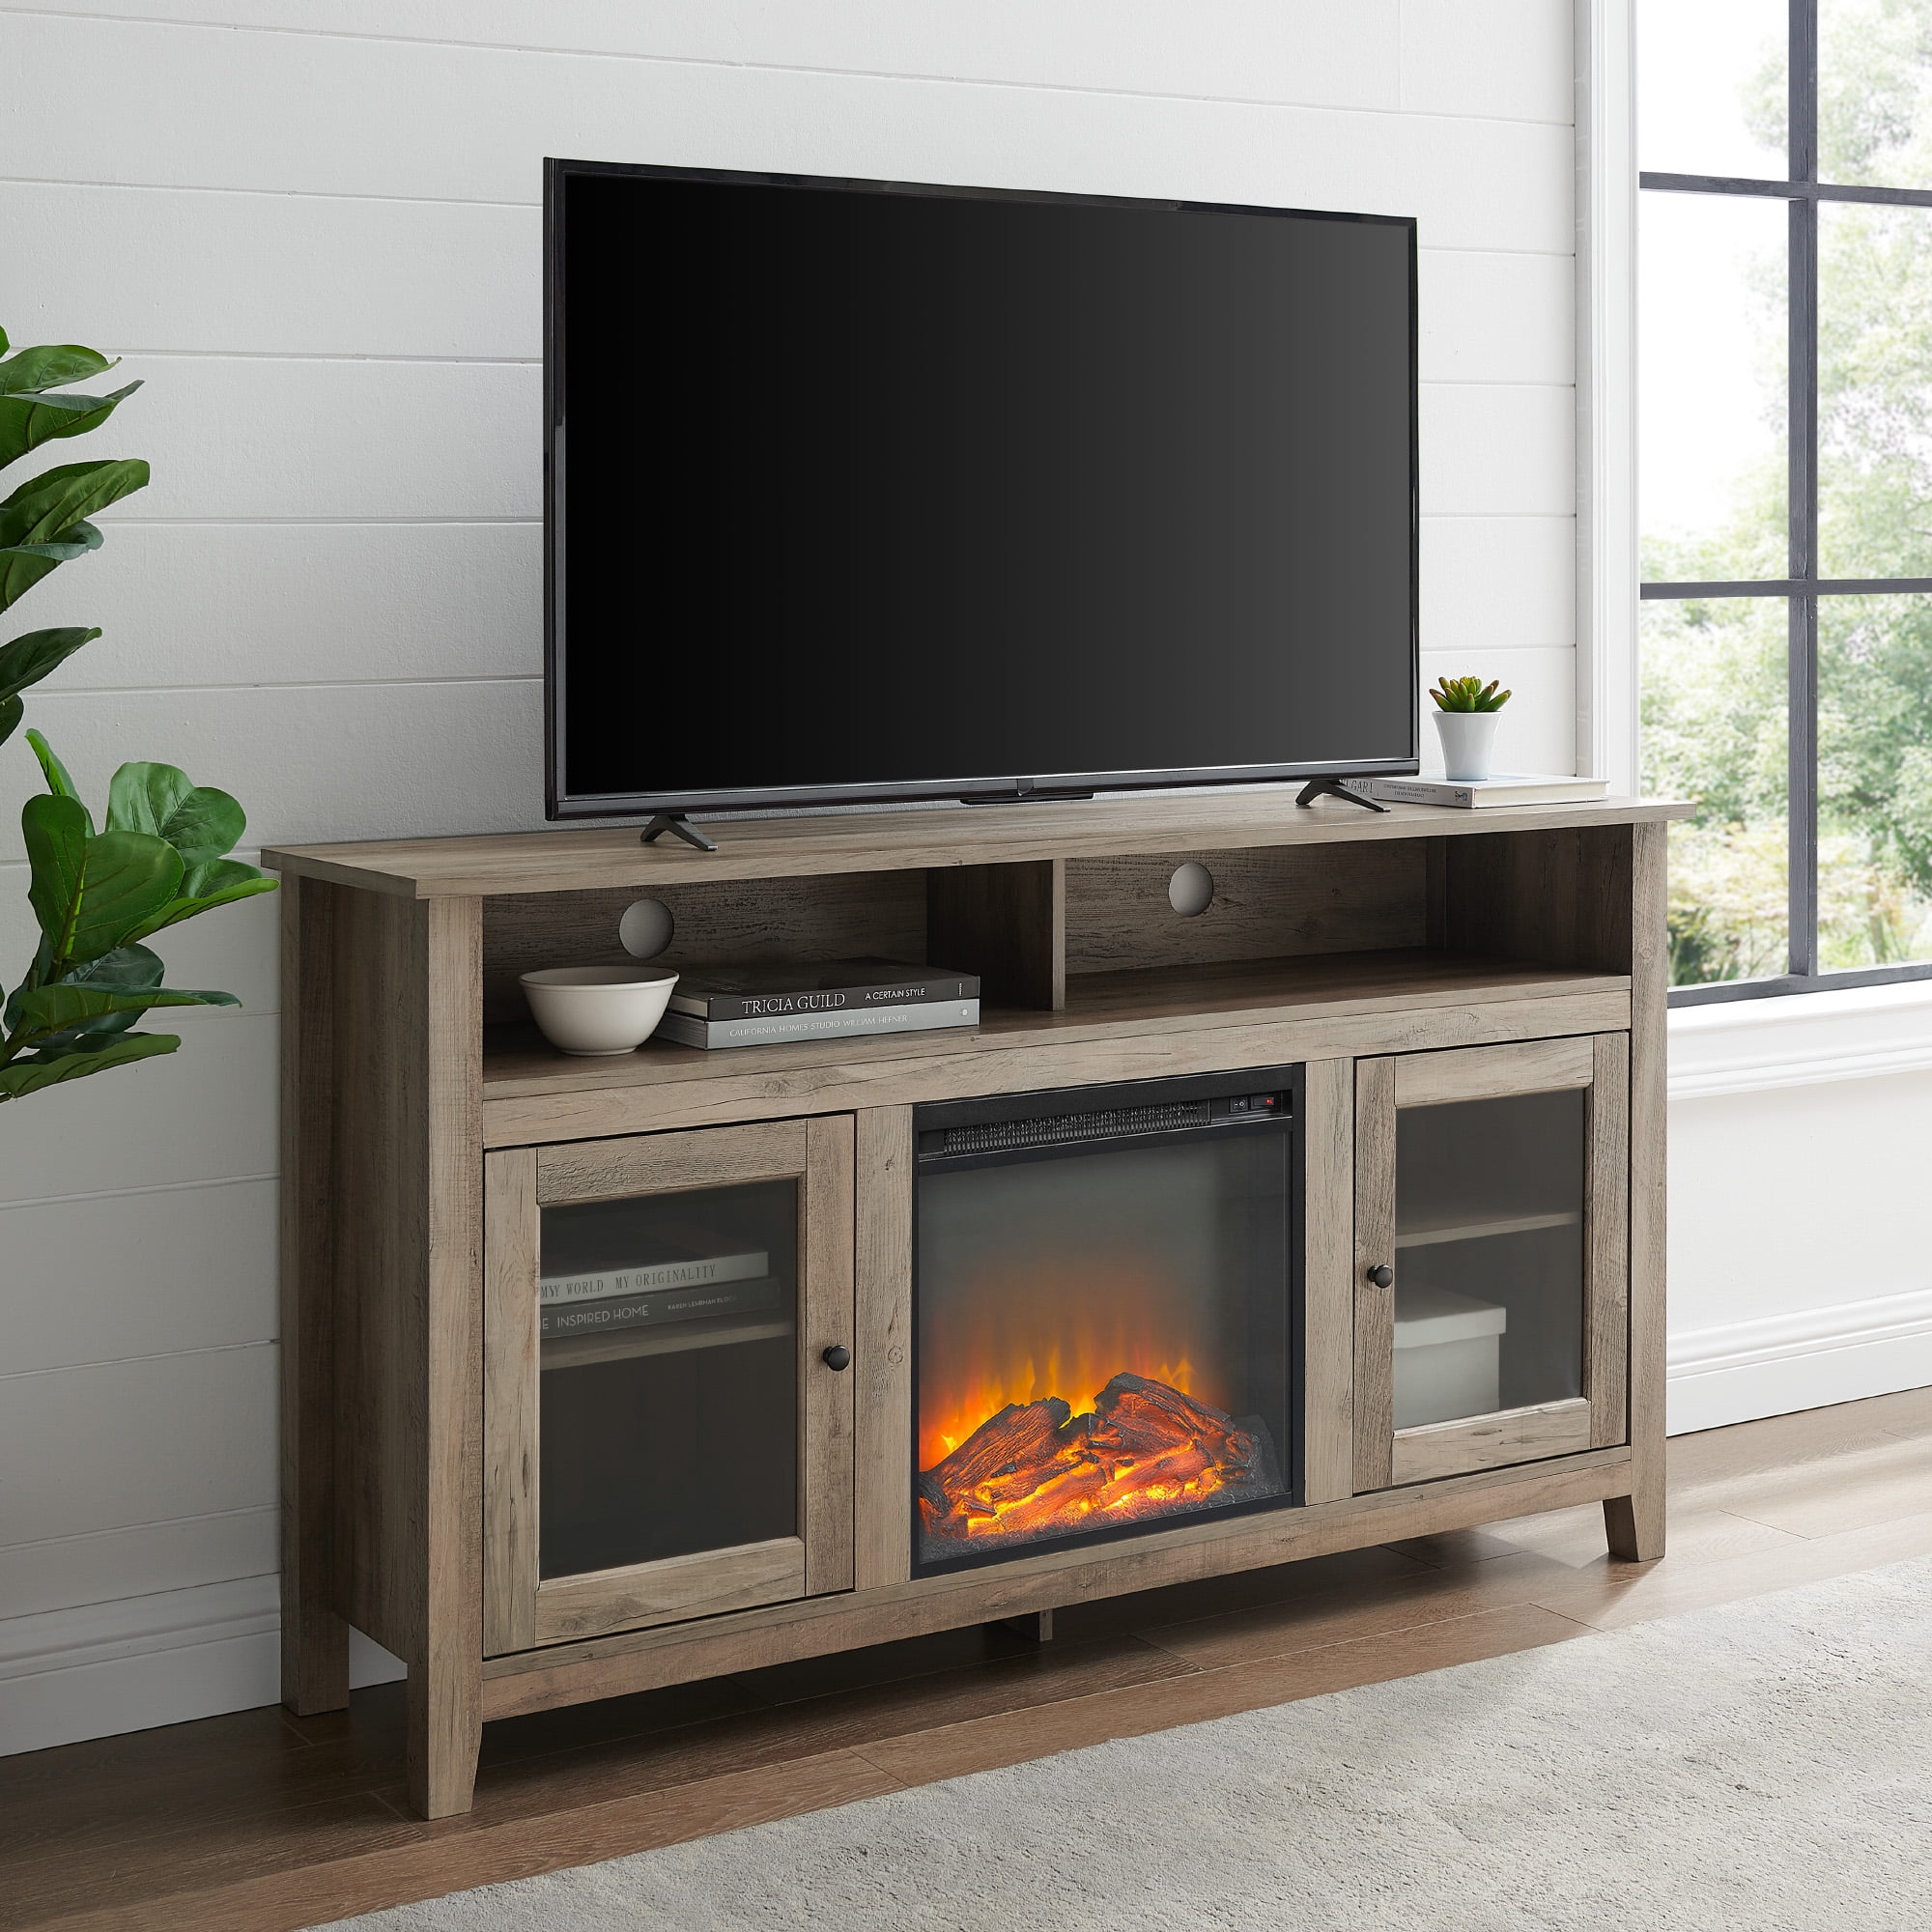 WWoven Paths Highboy 2 Door Electric Fireplace TV Stand for TVs up to 65", Grey Wash - Walmart.com